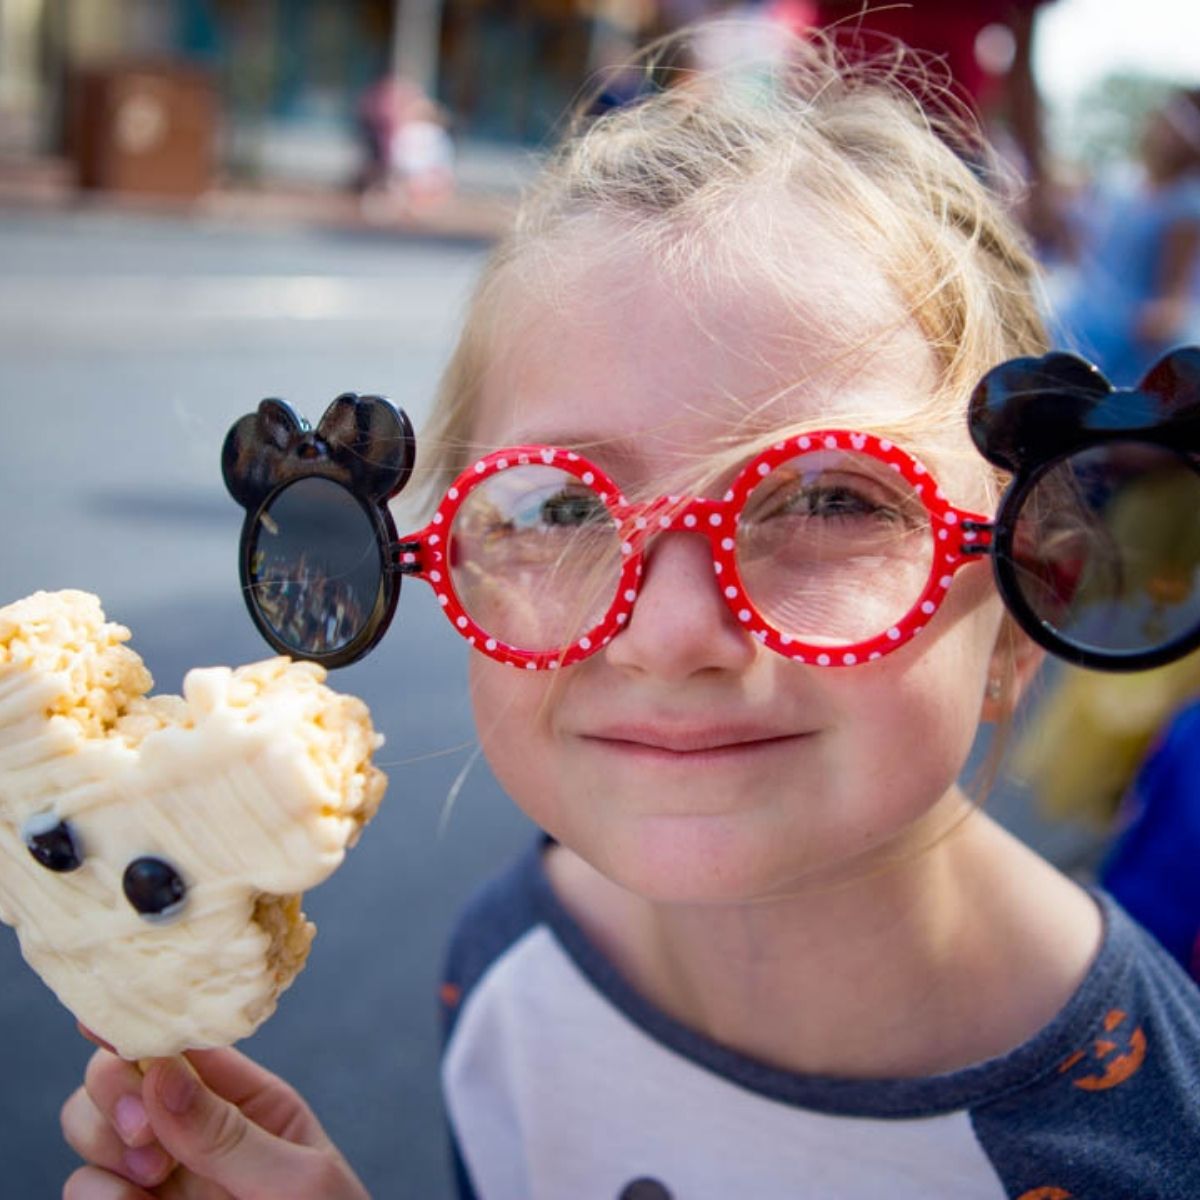 A young girl holding a rice crispie treat shaped like Mickey Mous